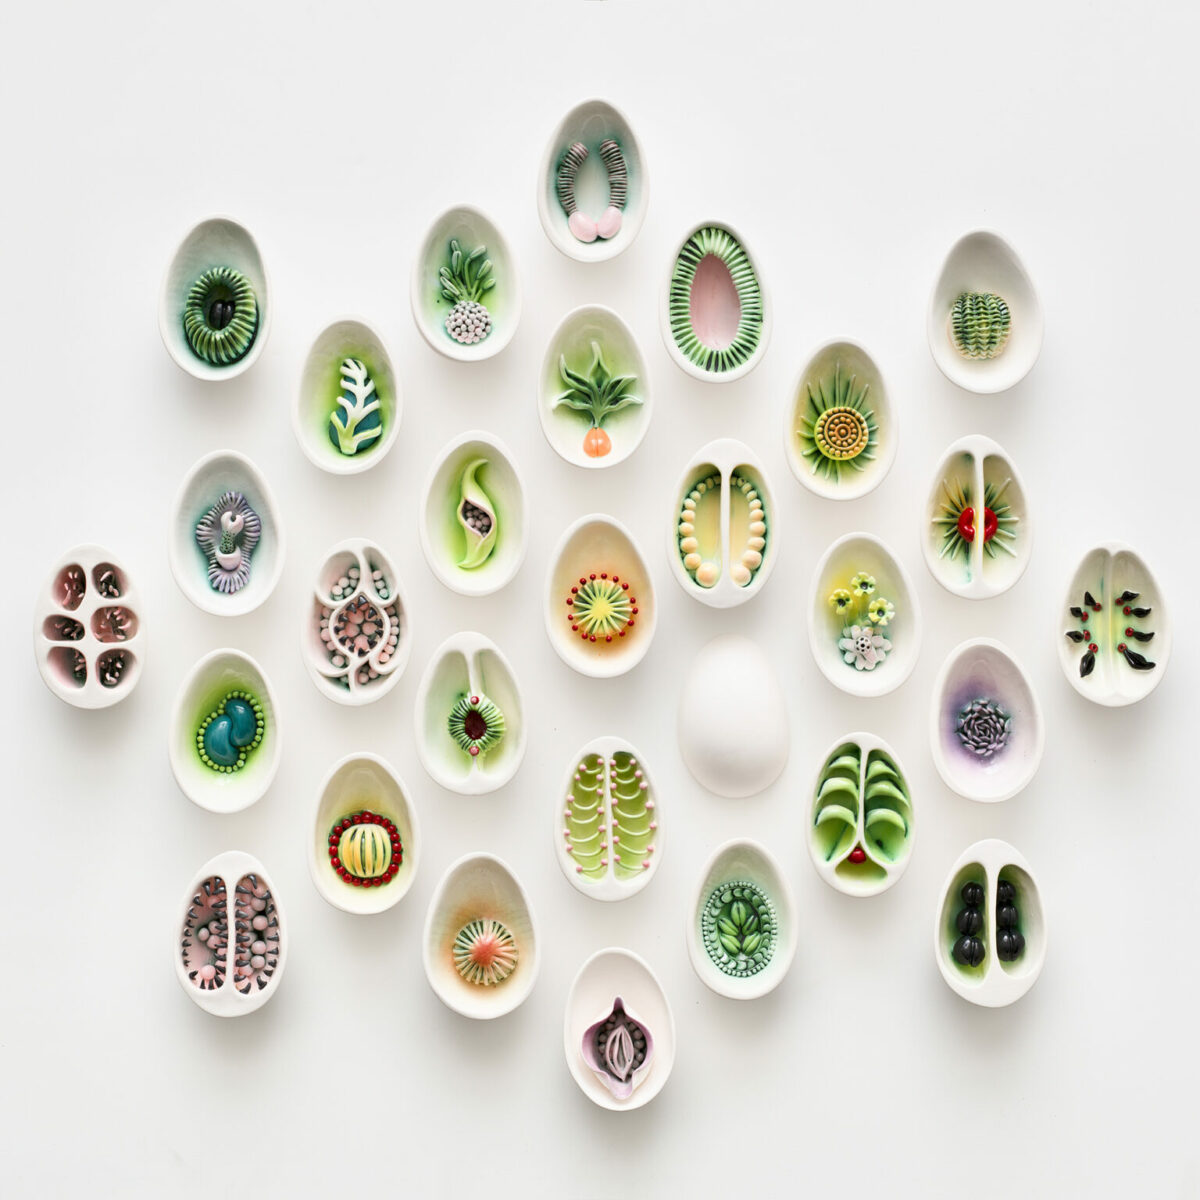 Delicate Porcelain Sculptures Of Cross Cut Pods Encased With Seeds And Other Vegetables By Sally Kent 3